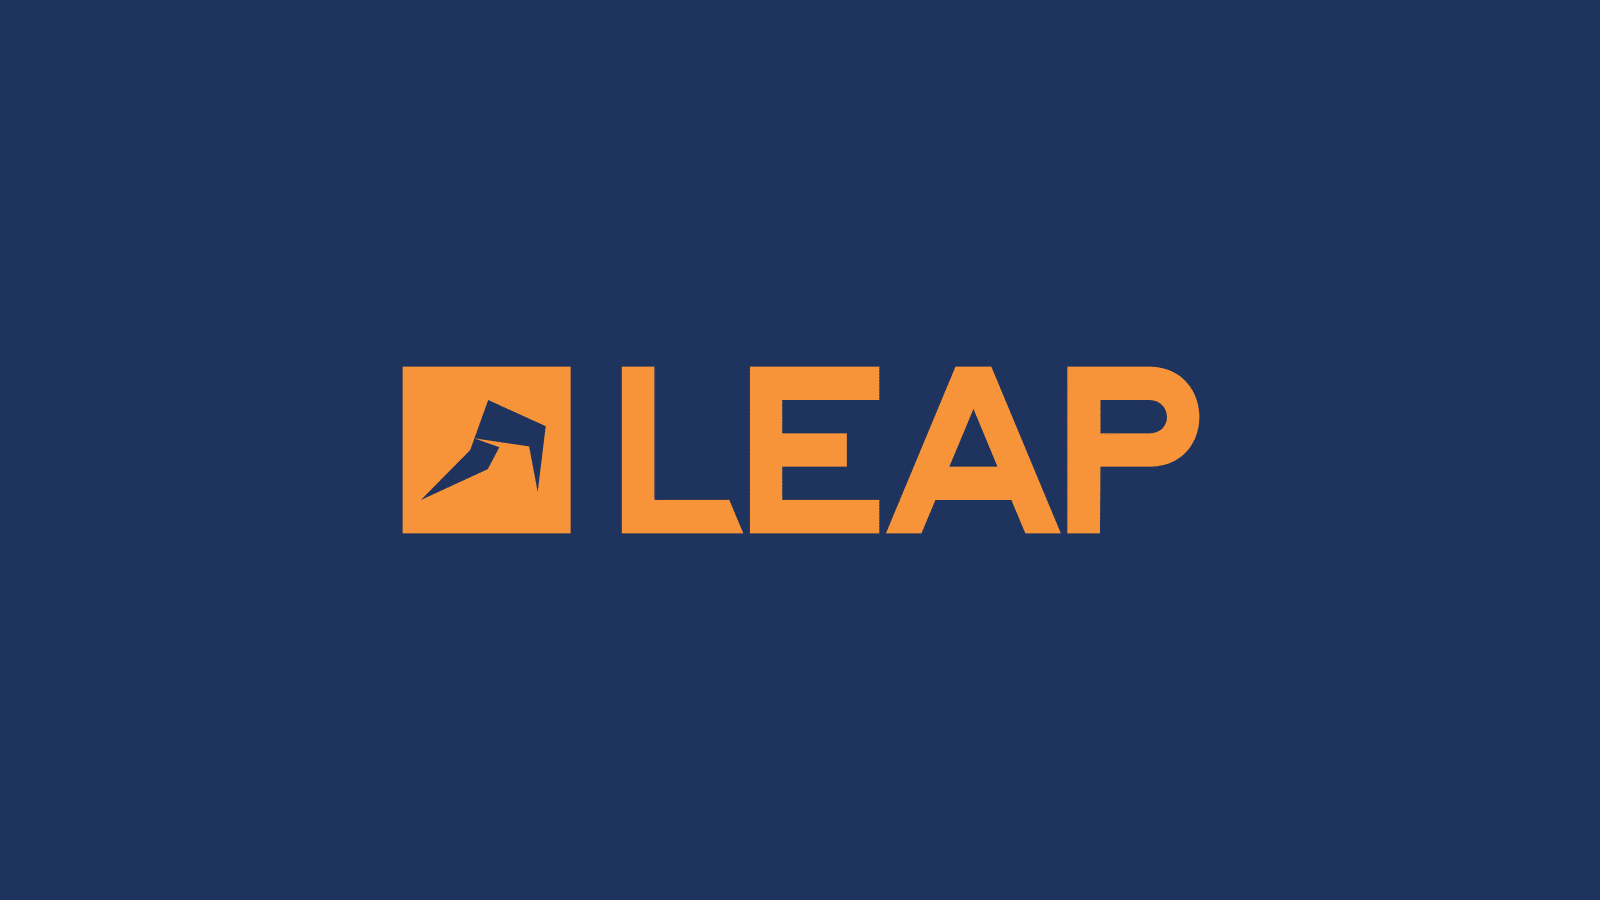 leap office software free download for windows 8